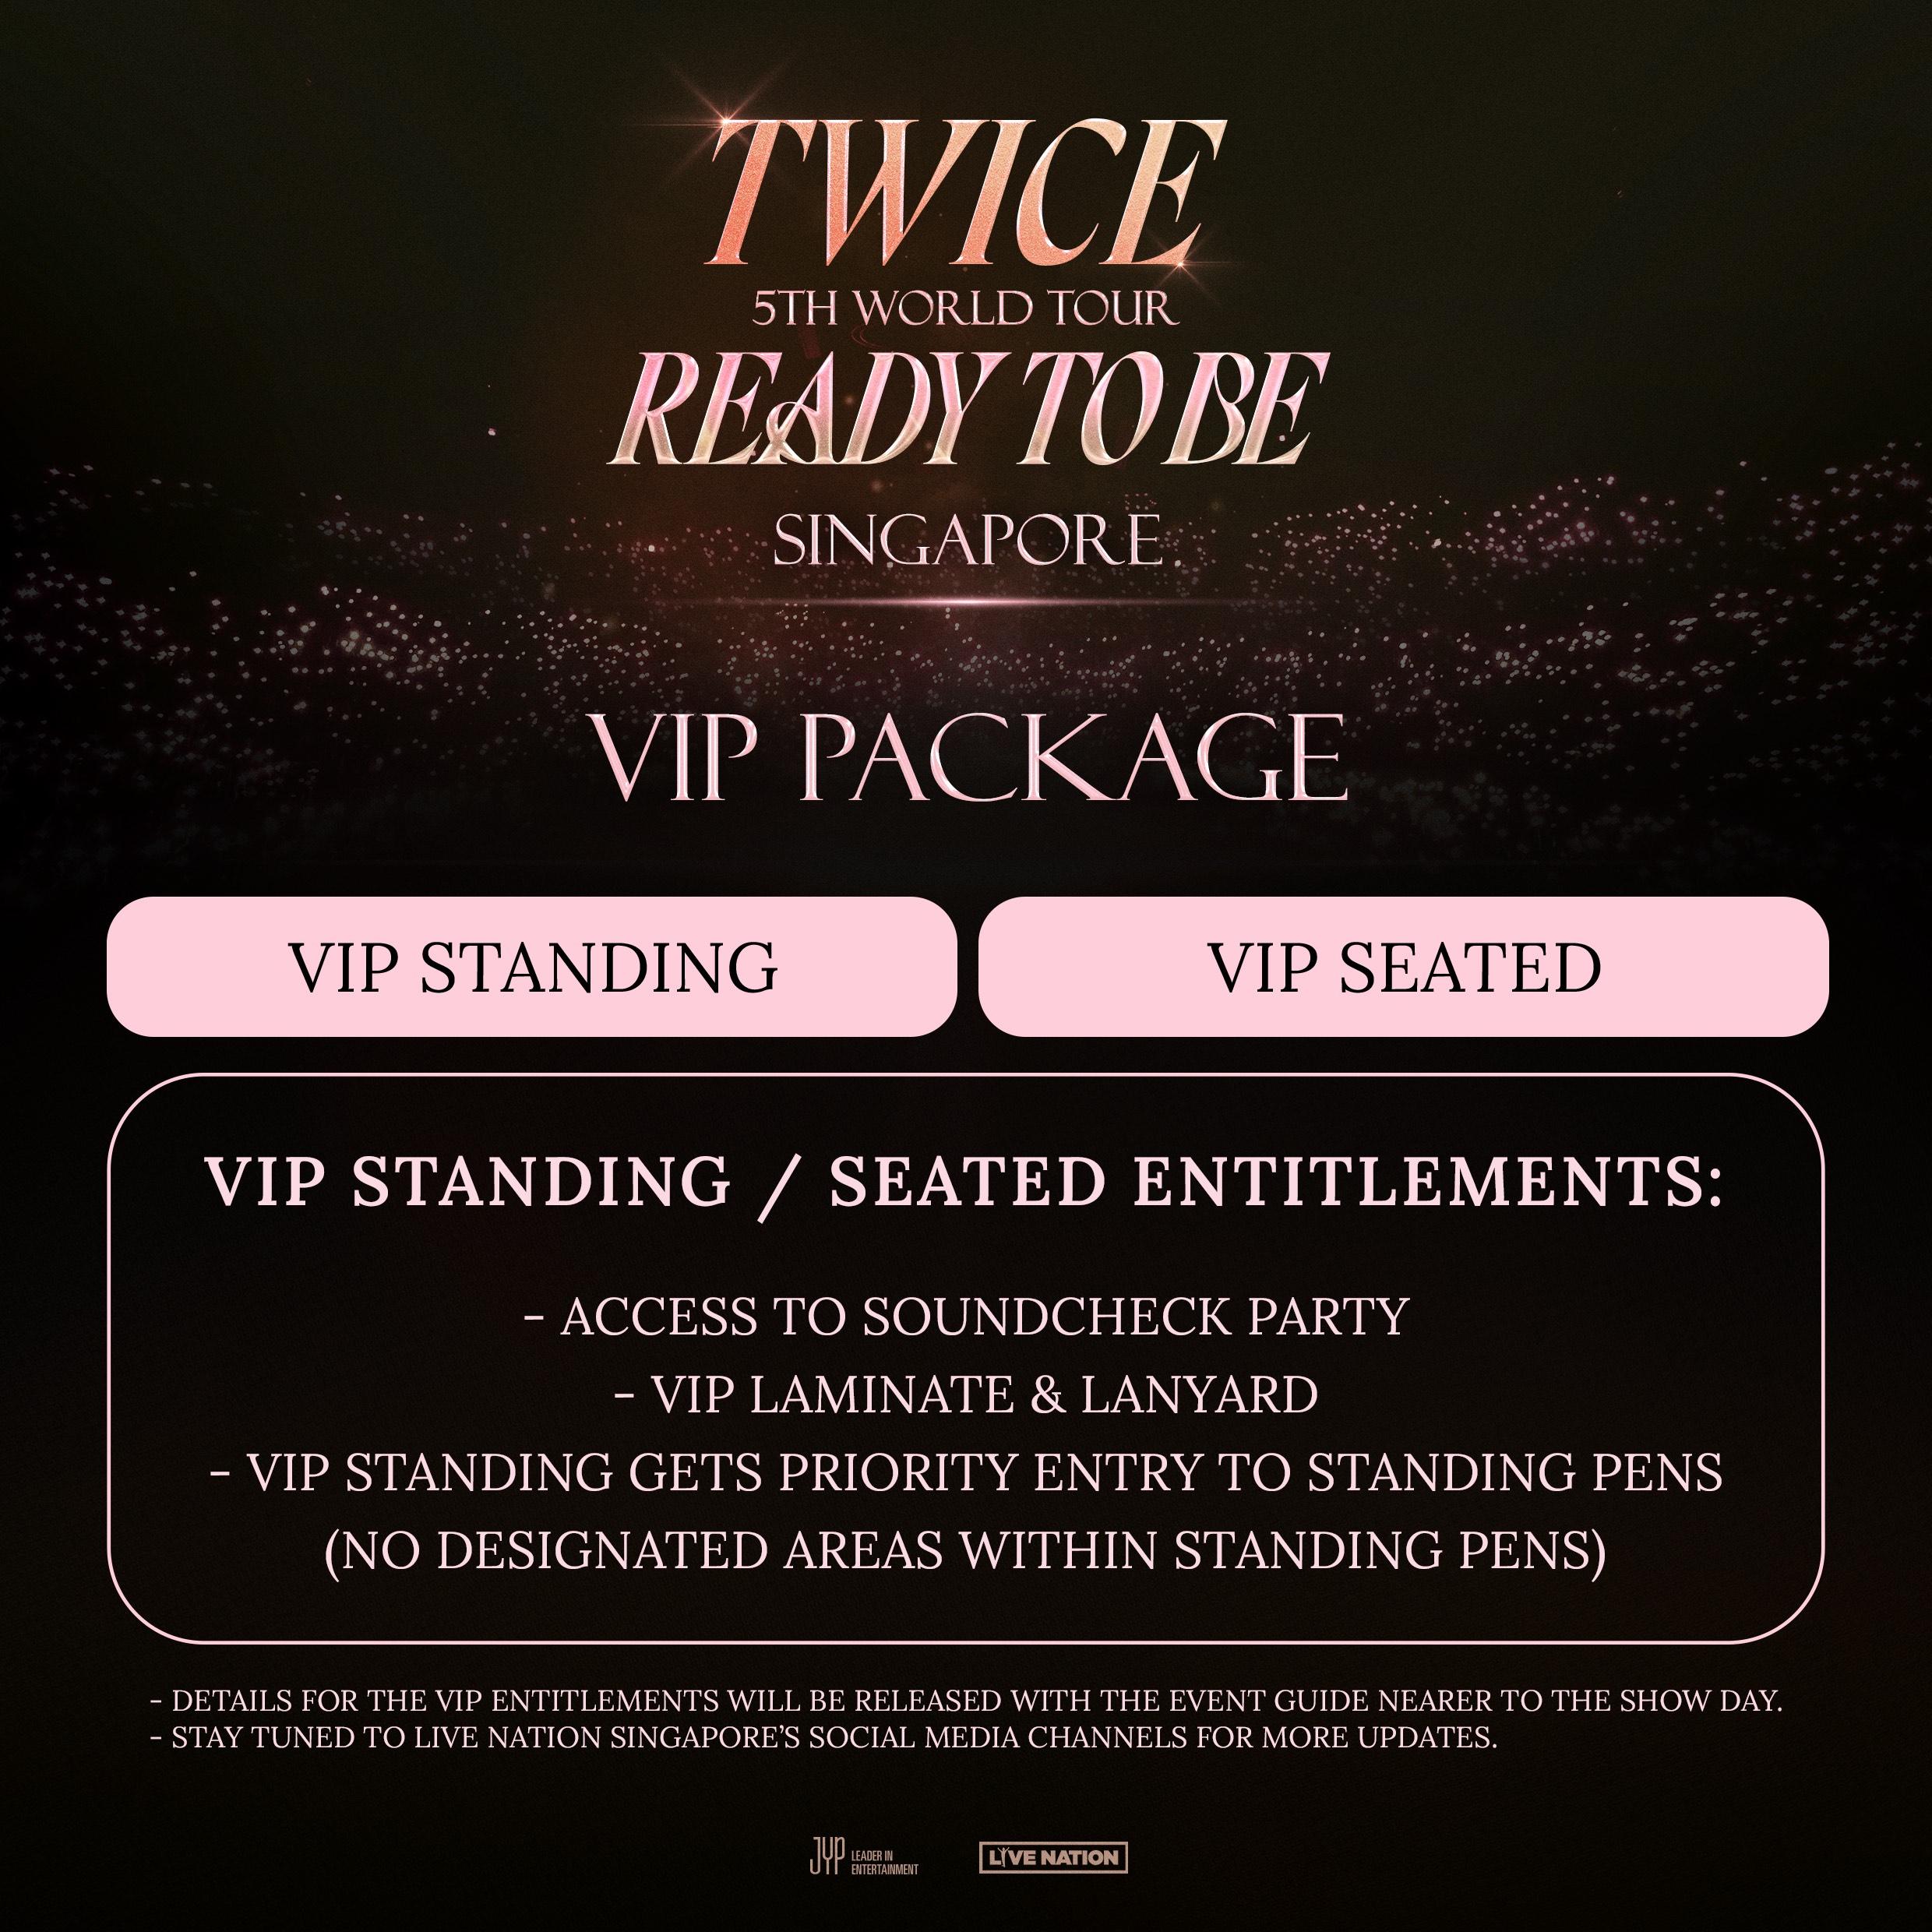 Score tickets to TWICE 5th World Tour Ready To Be concert